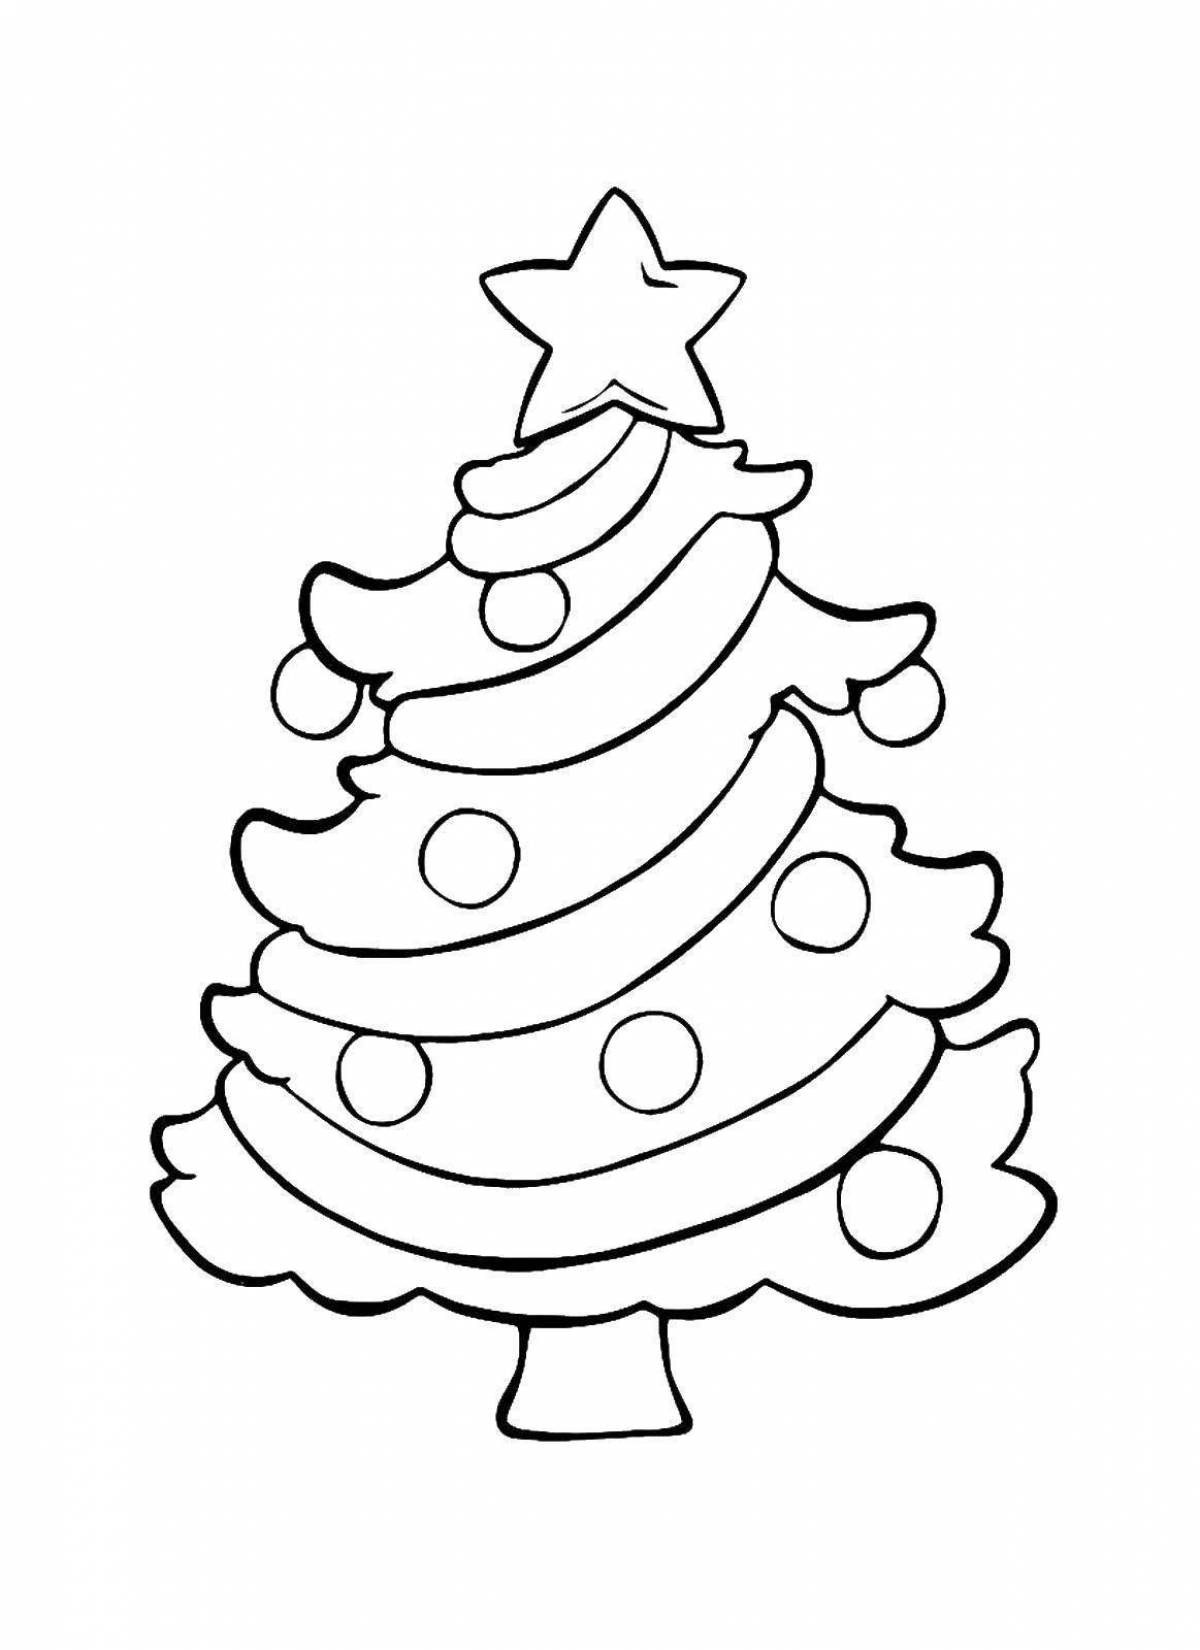 Exciting little Christmas coloring book